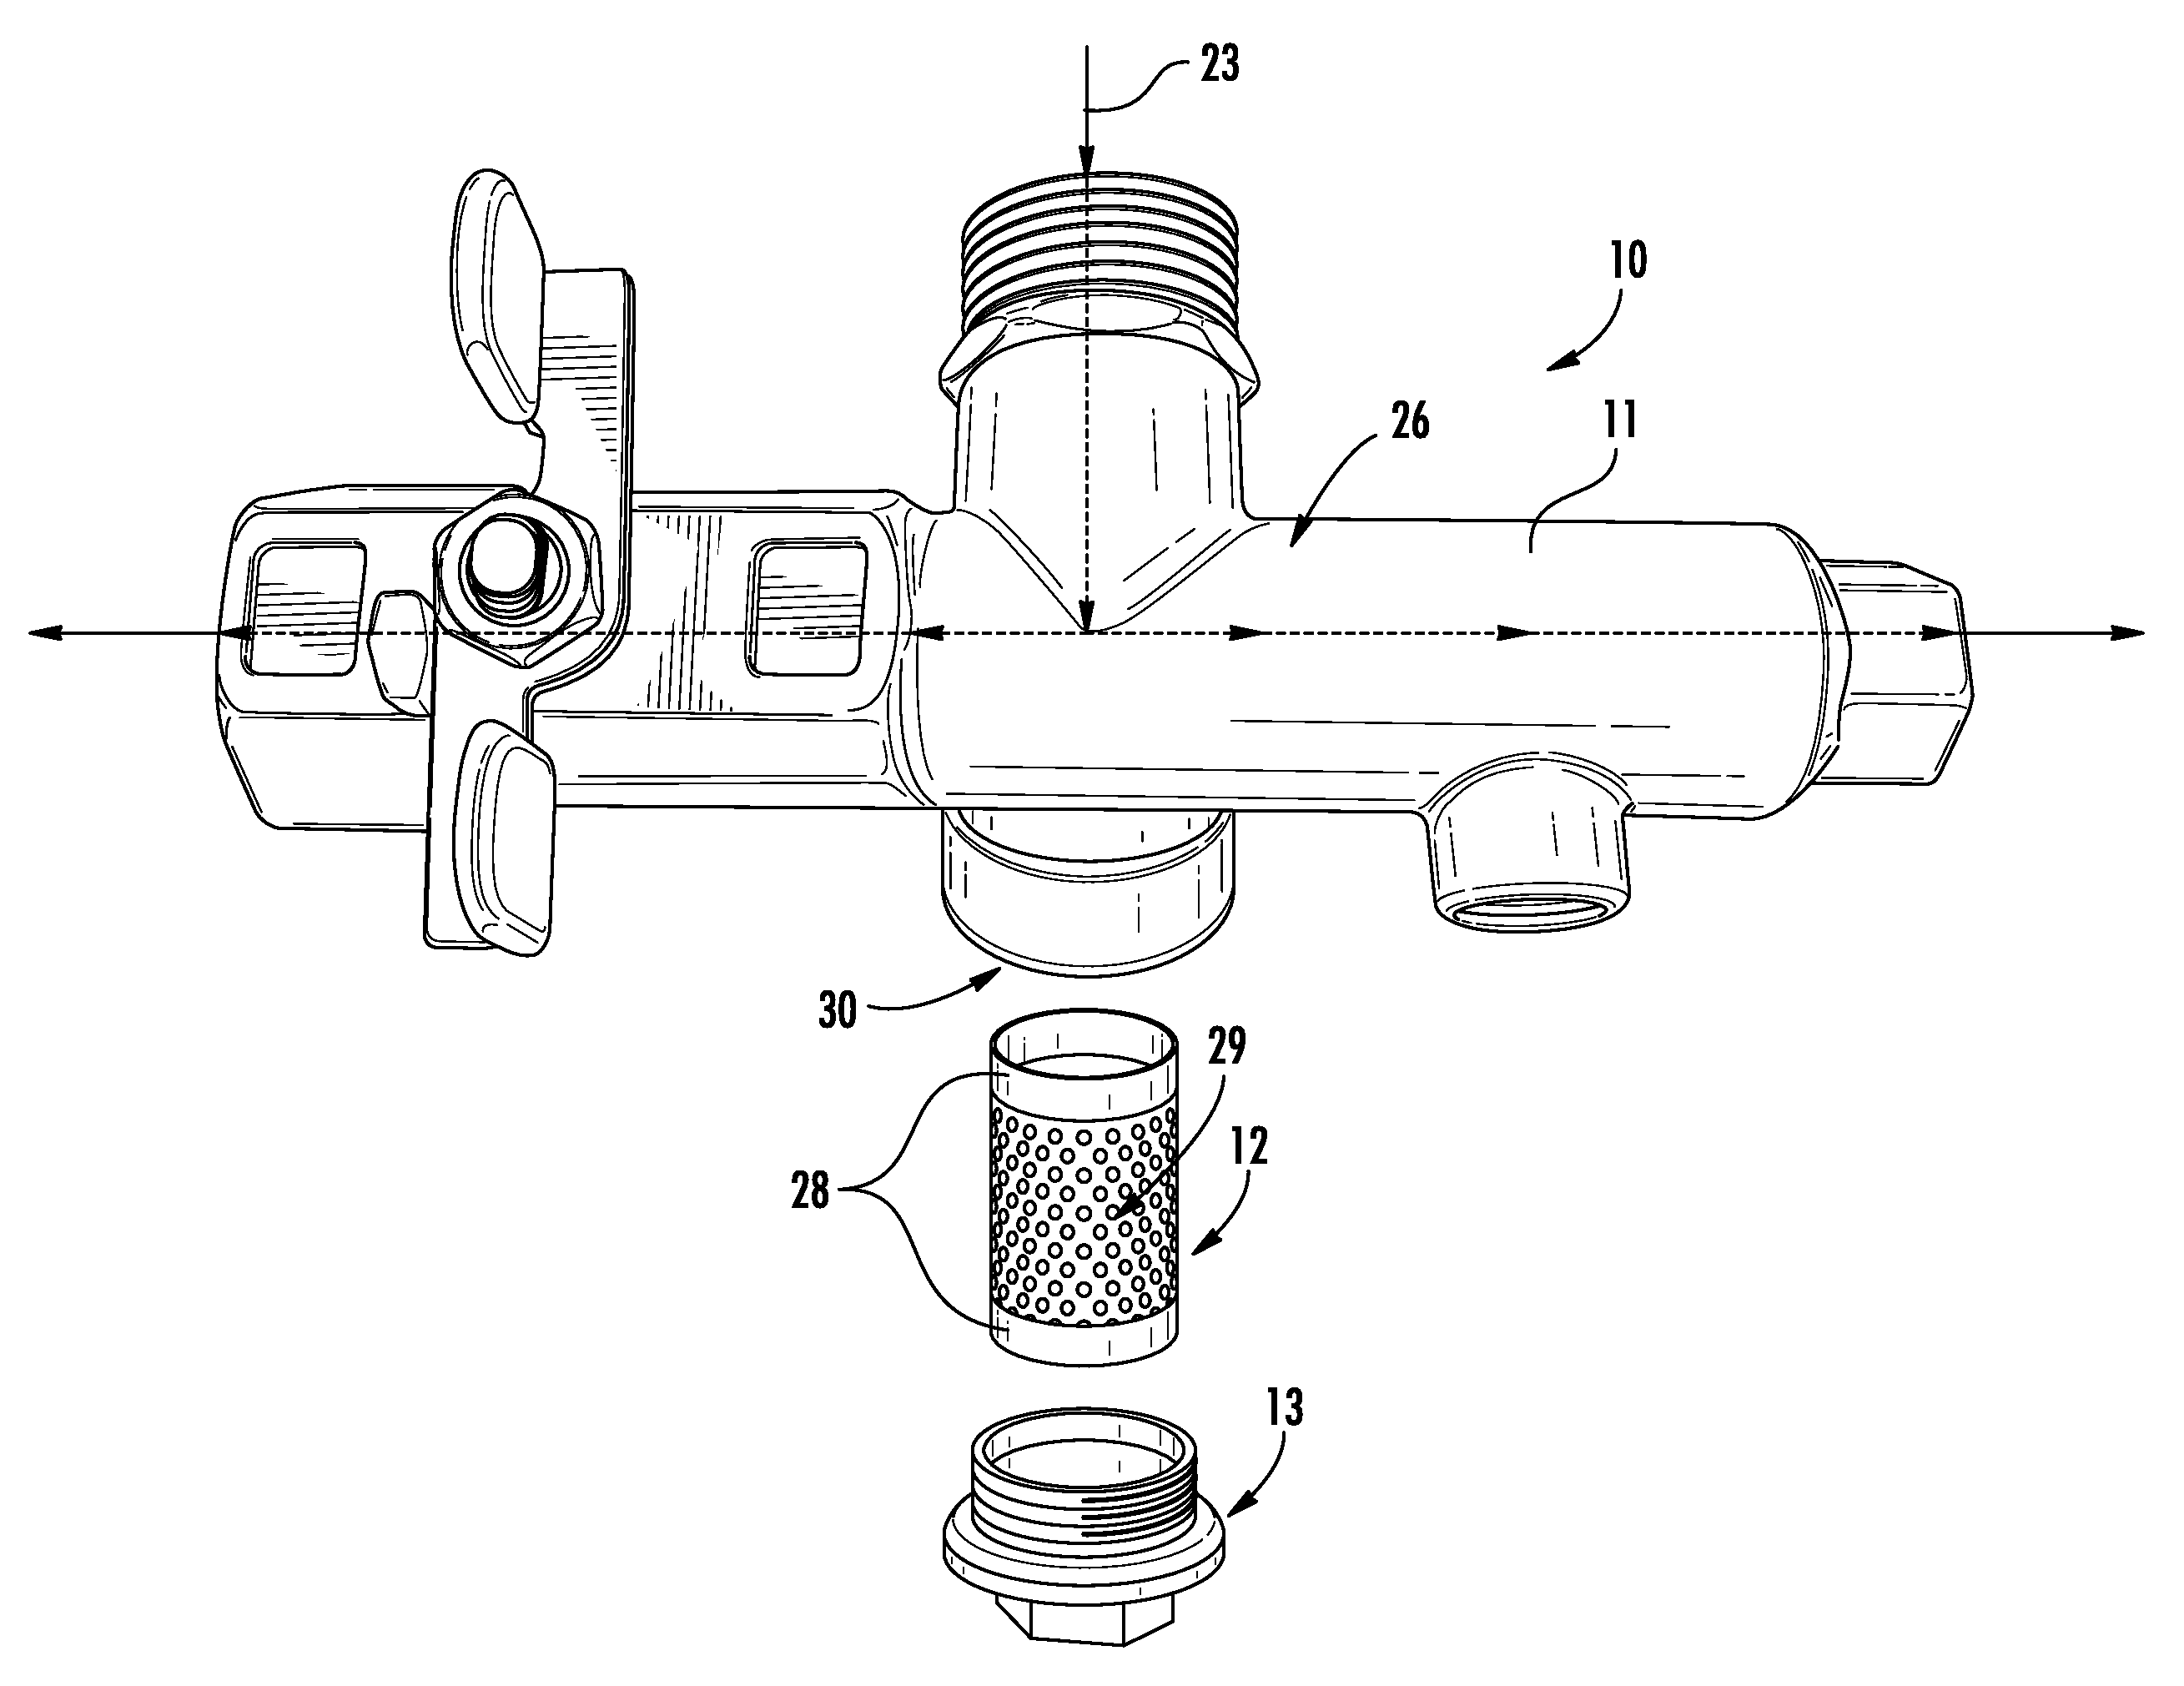 Multi-port valve device with dual directional strainer